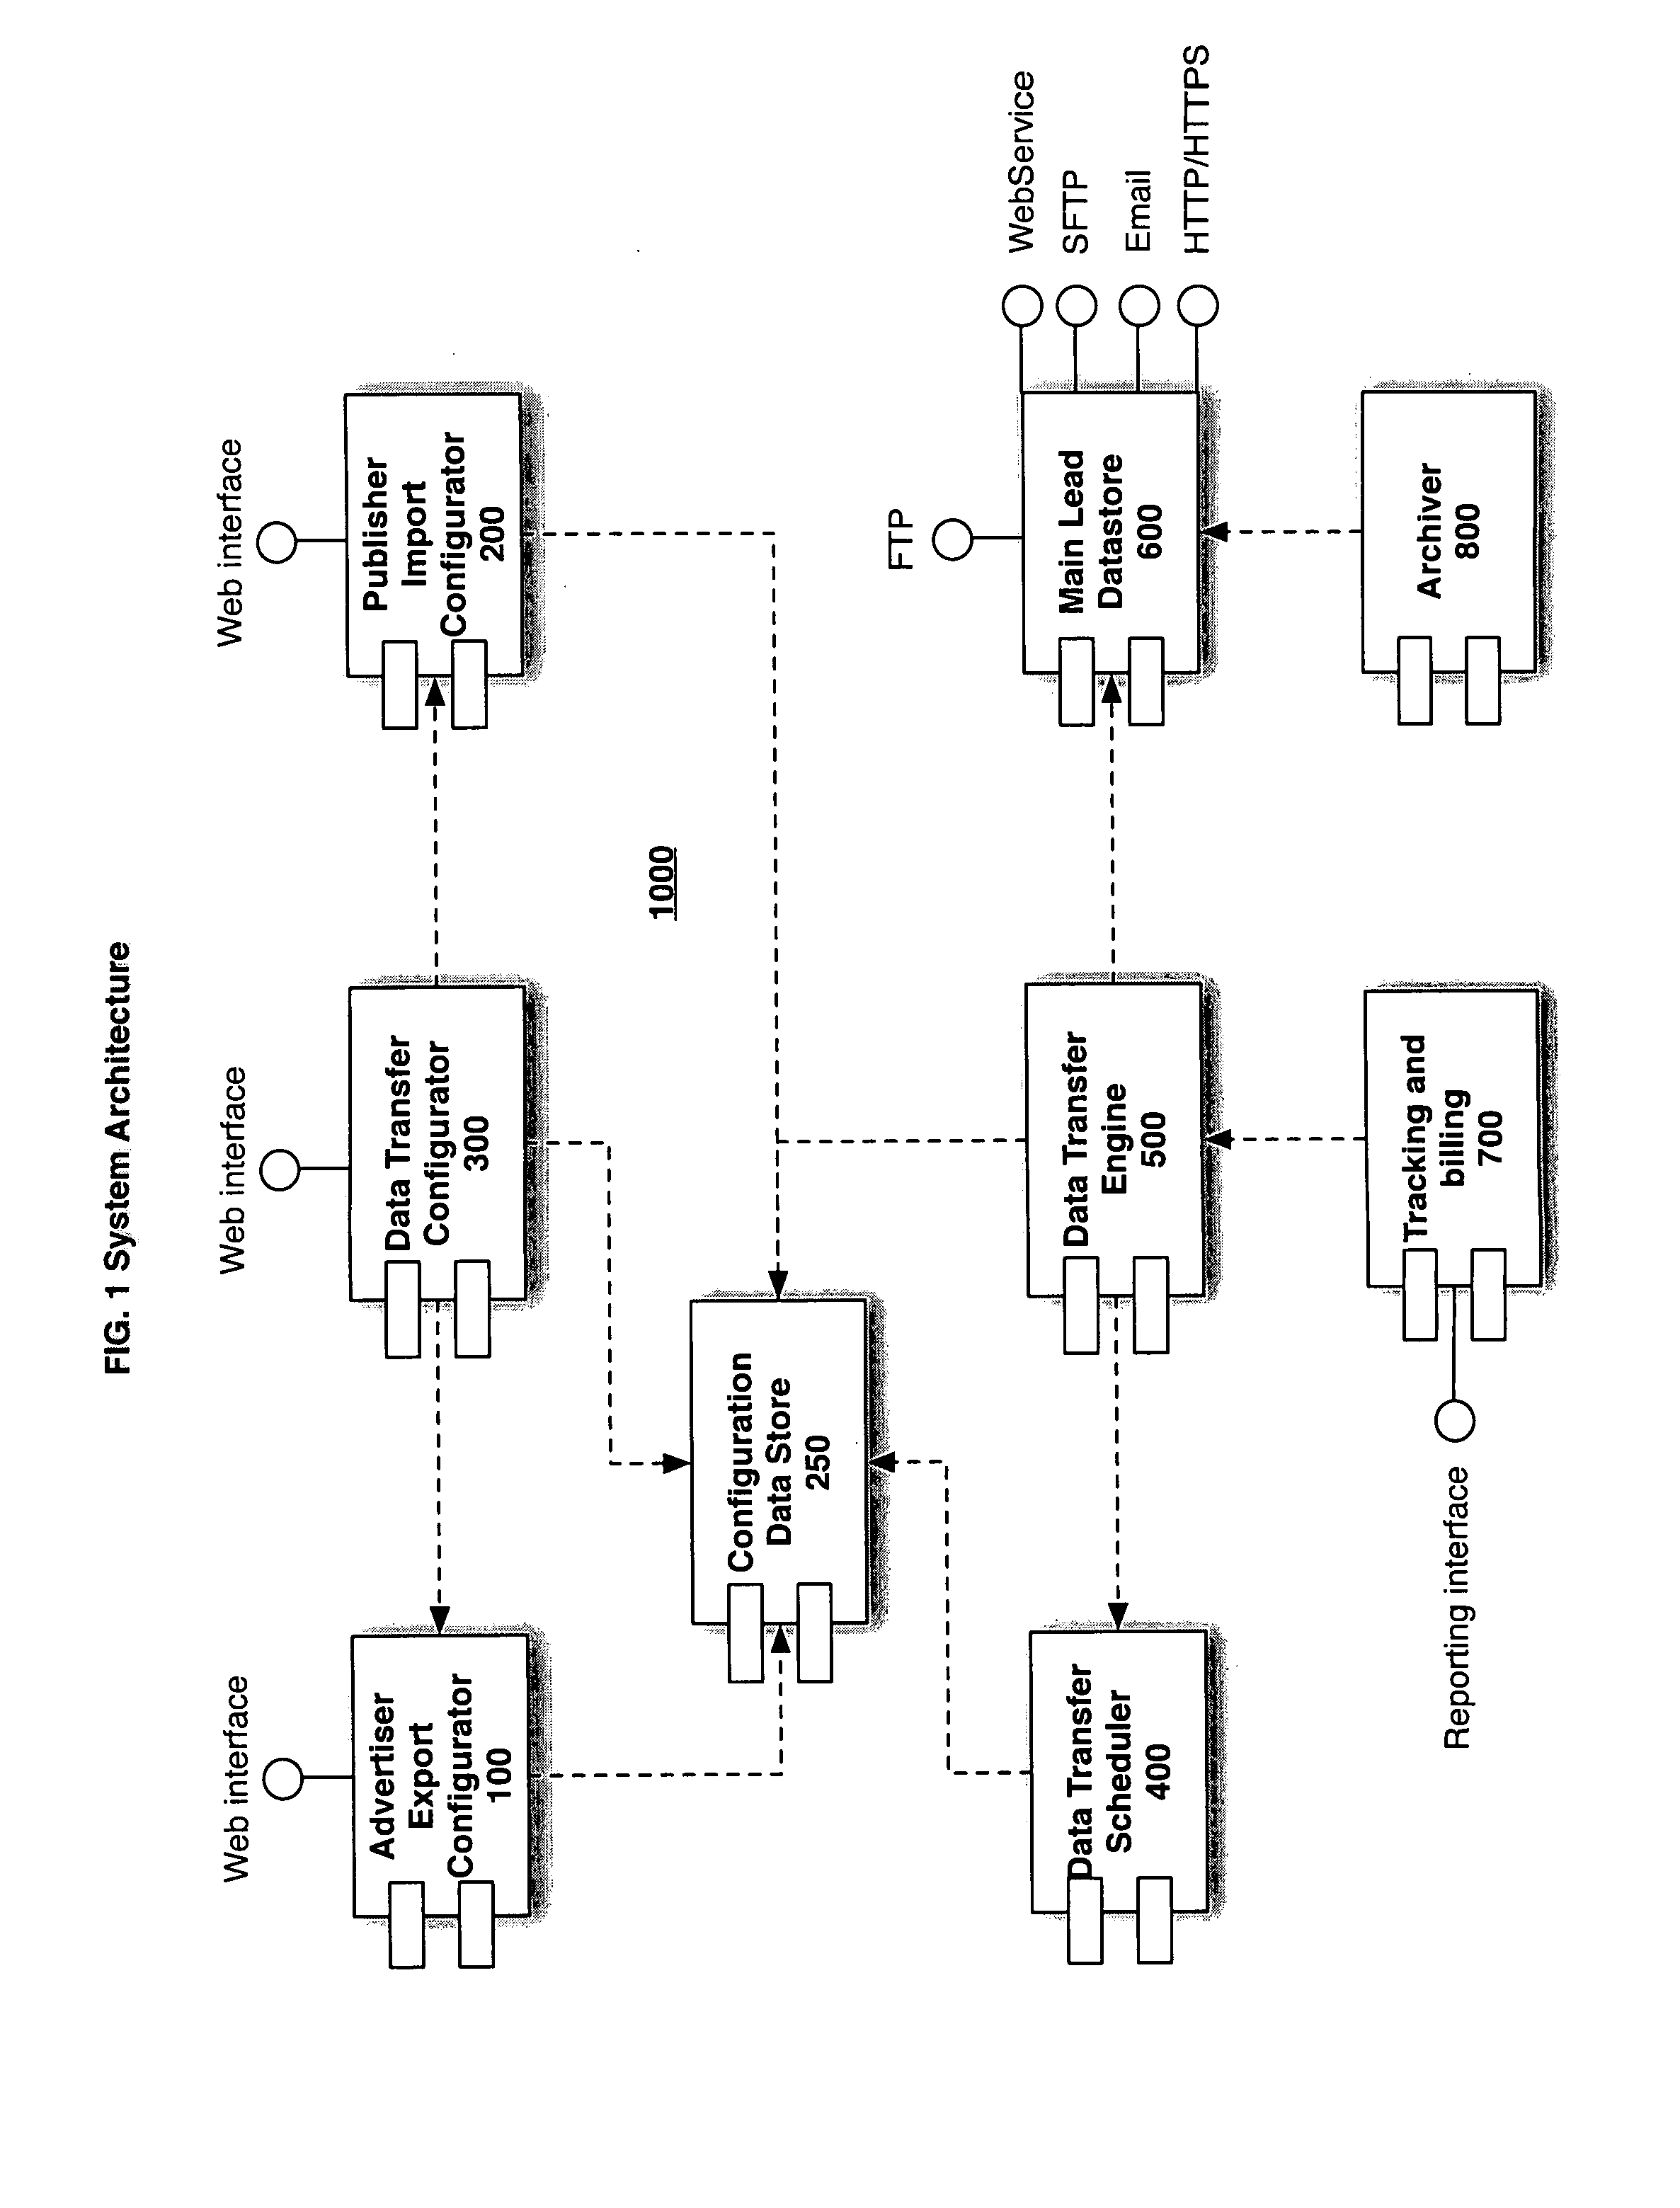 System and method for connecting and managing data transfers over the internet